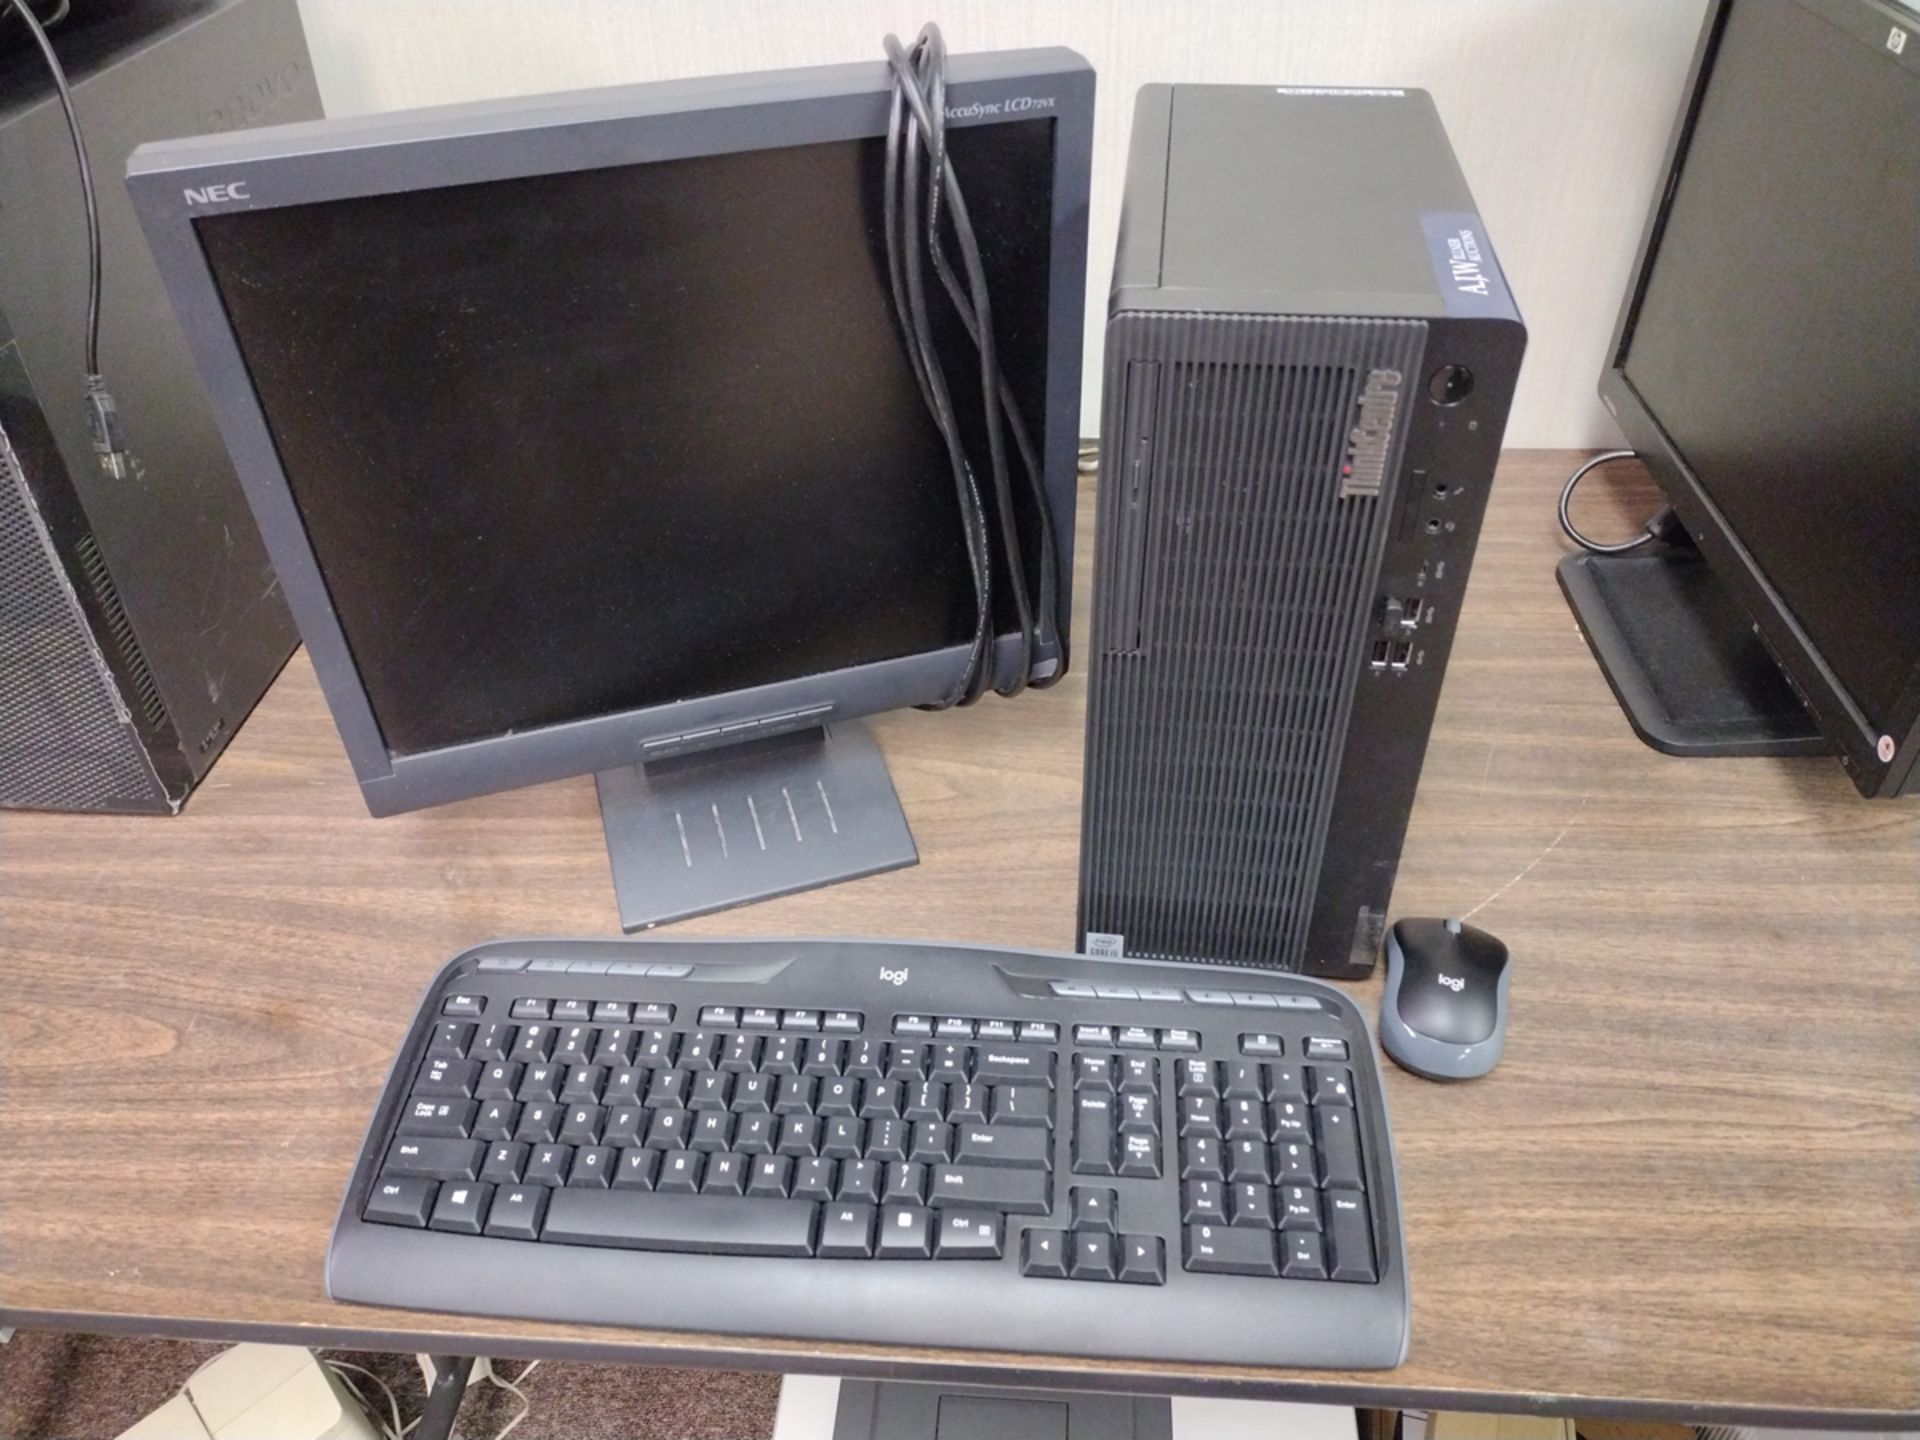 Lenovo M70t ThinkCentre i5 PC w/ Monitor and Keyboard